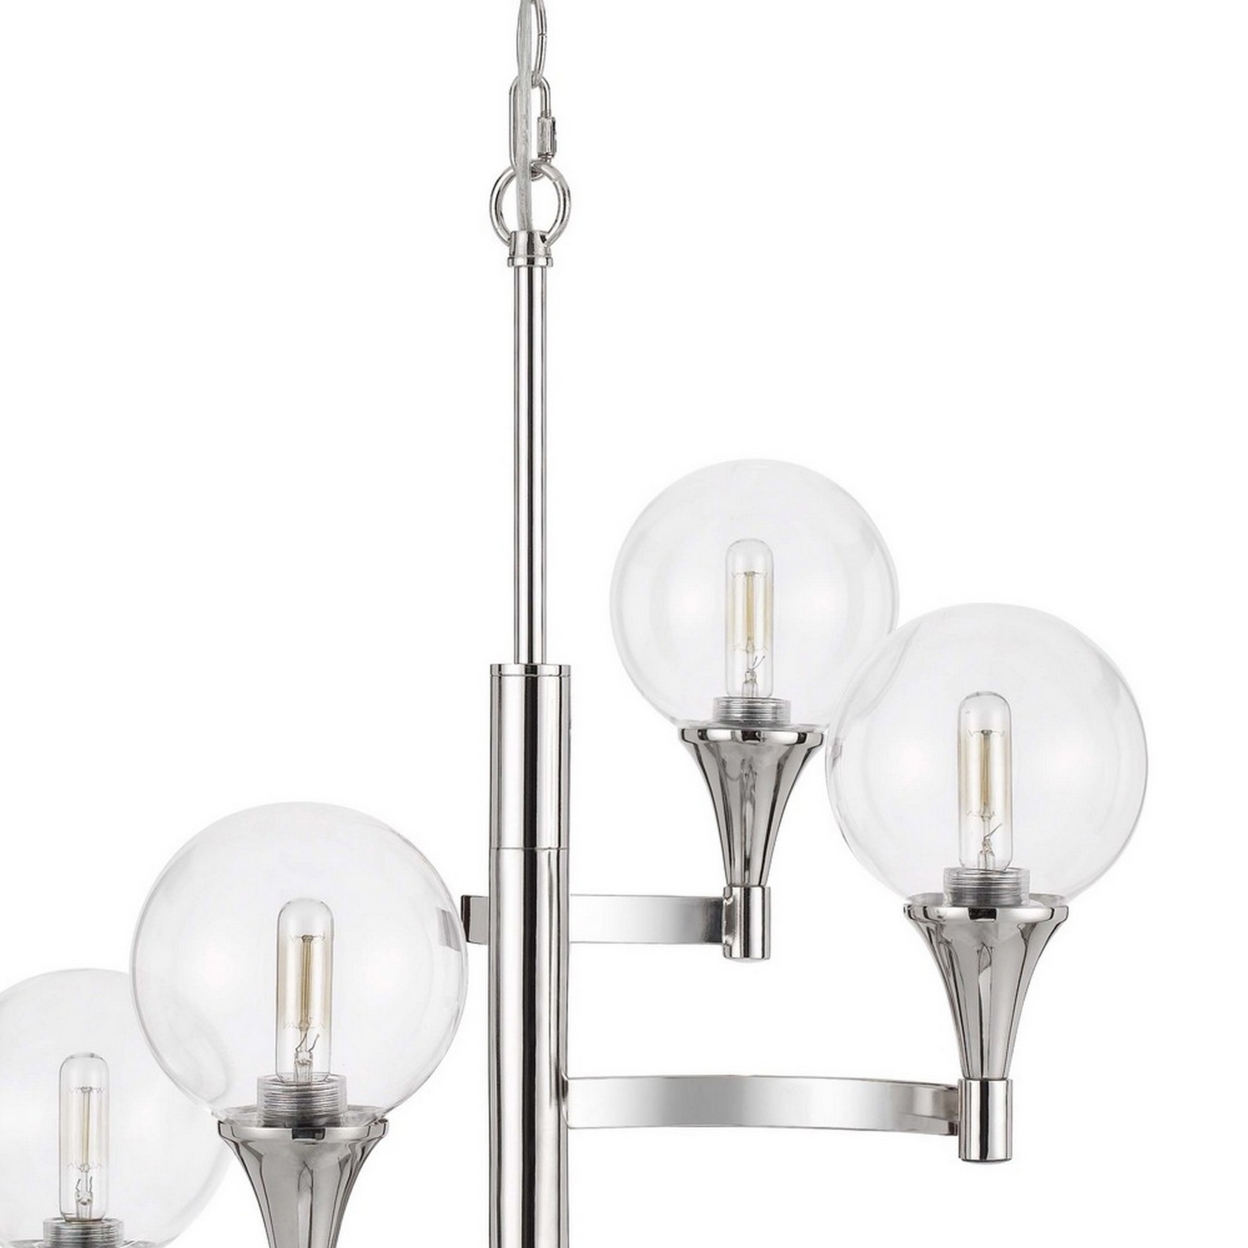 Chandelier With 4 Globe Glass Shades And Cone Design Holders, Chrome- Saltoro Sherpi